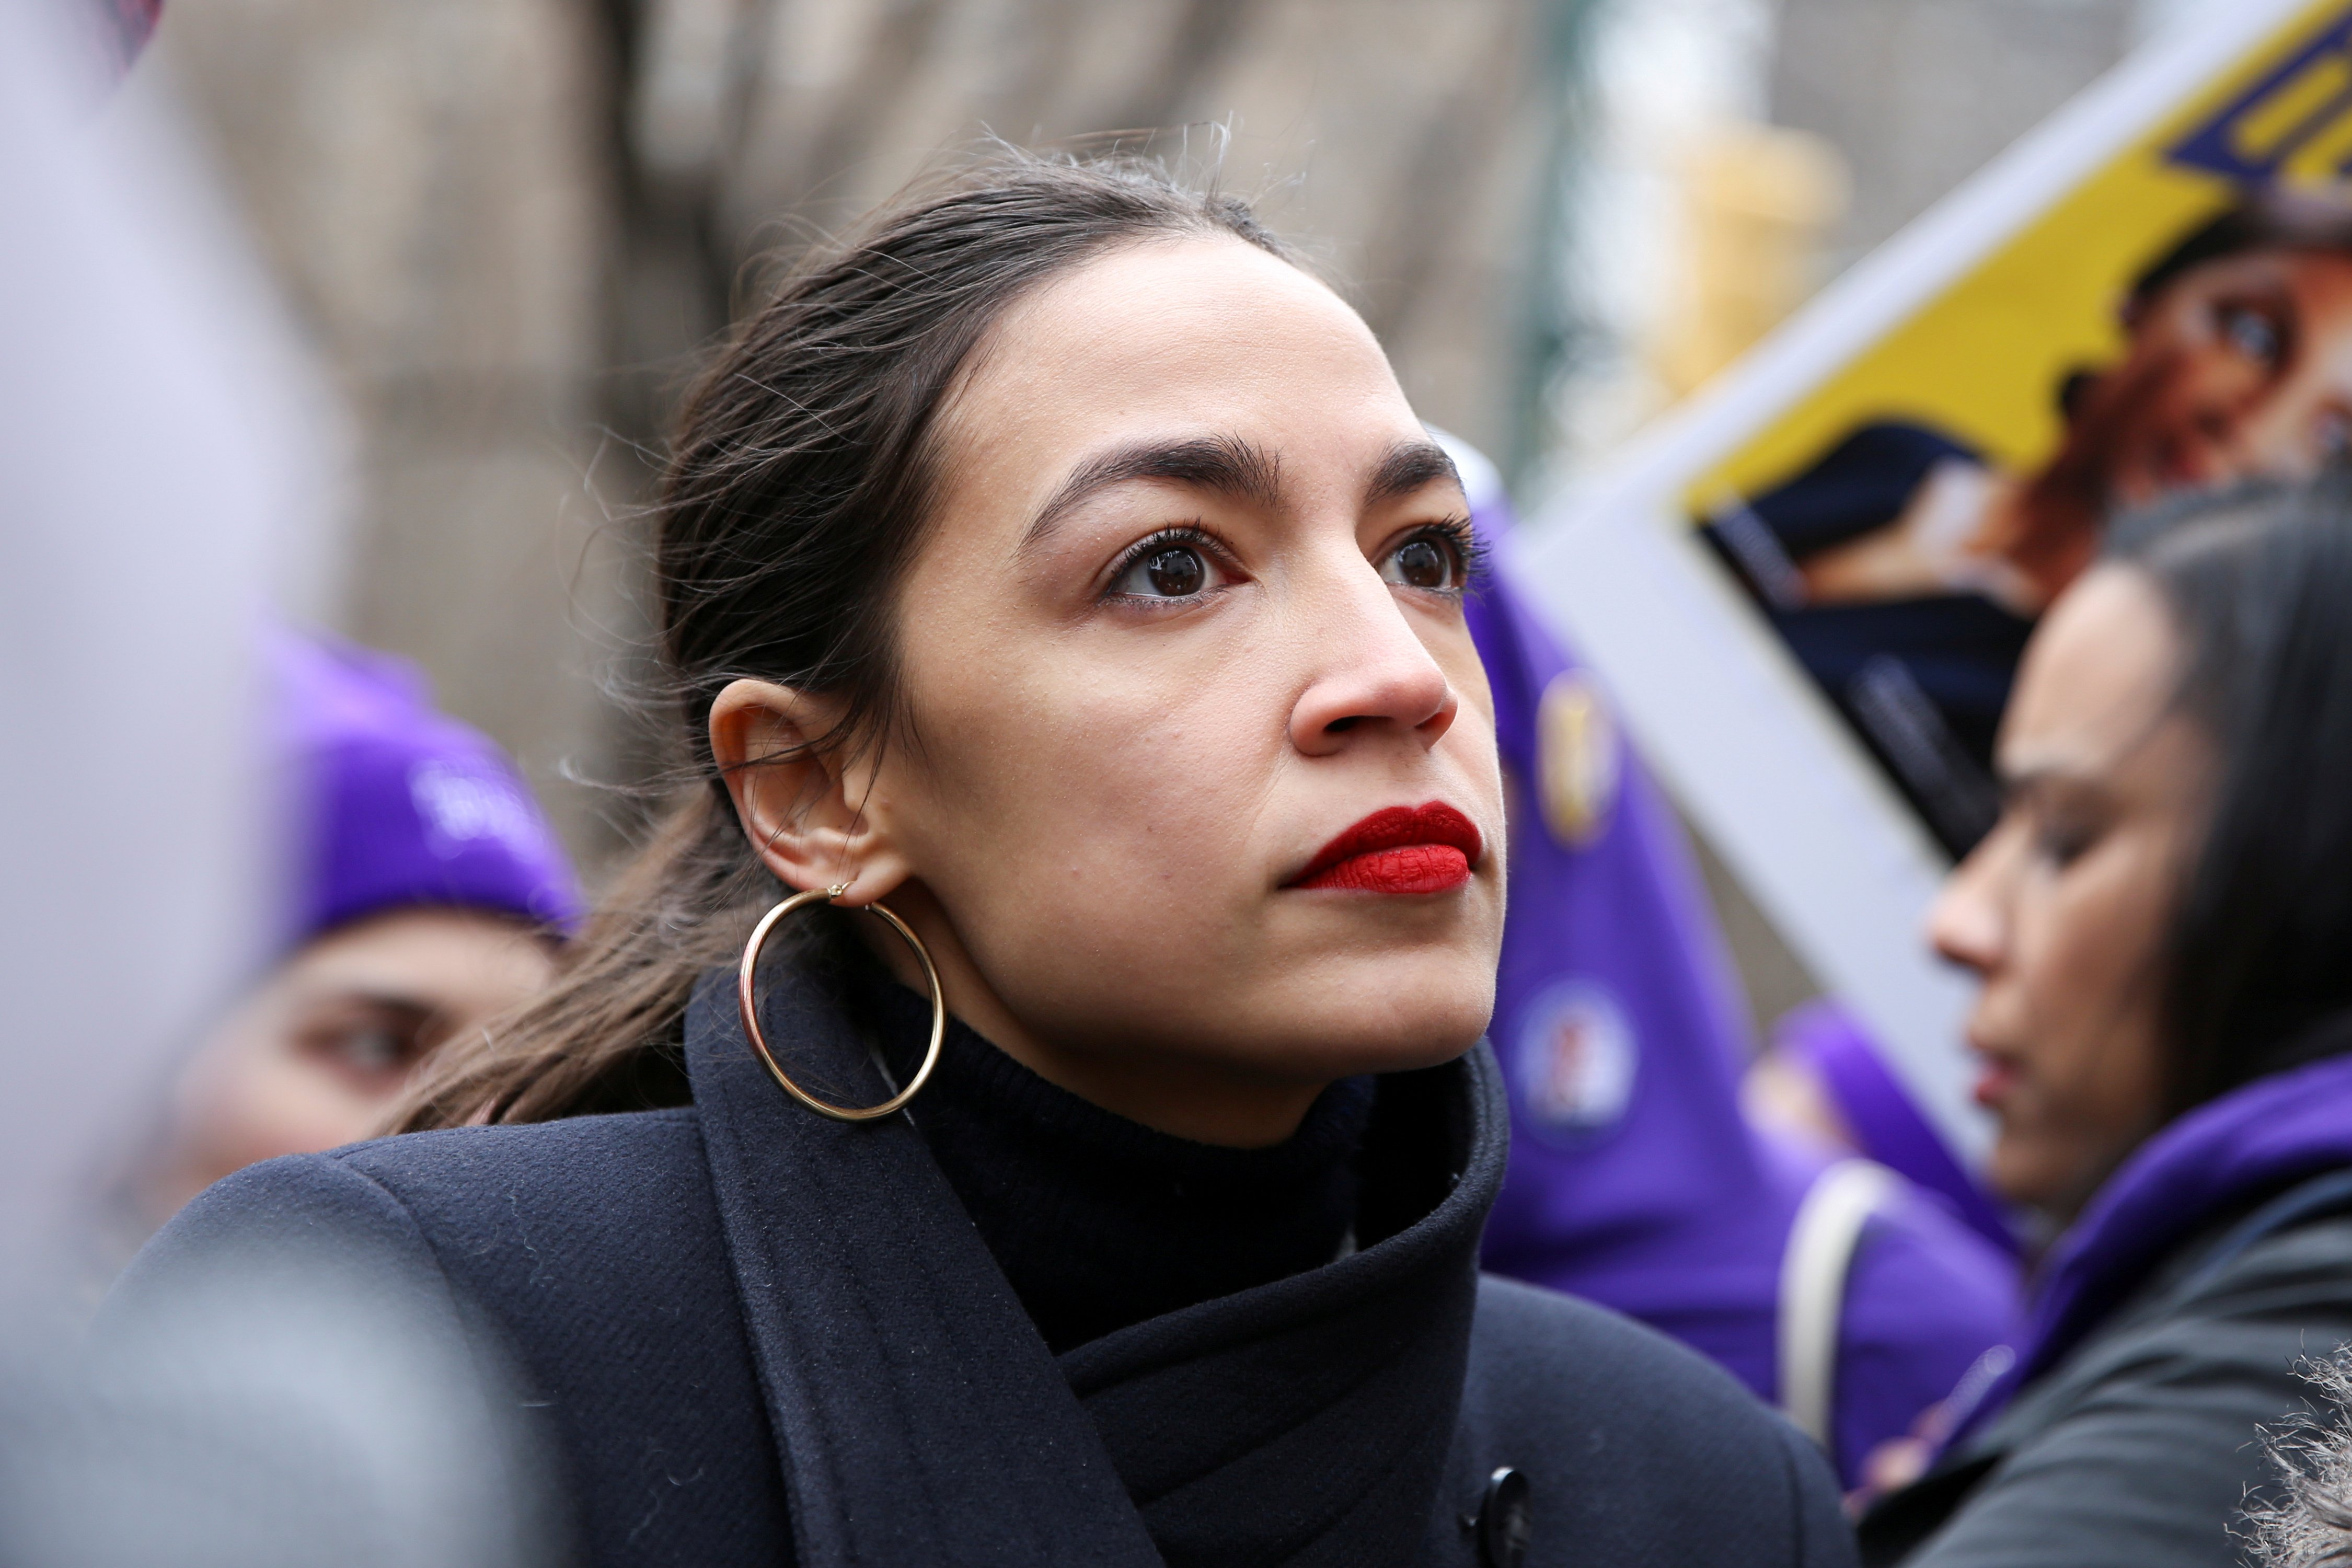 Rep. Alexandria Ocasio-Cortez looks on during a march organised by the Women's March Alliance in the Manhattan borough of New York City